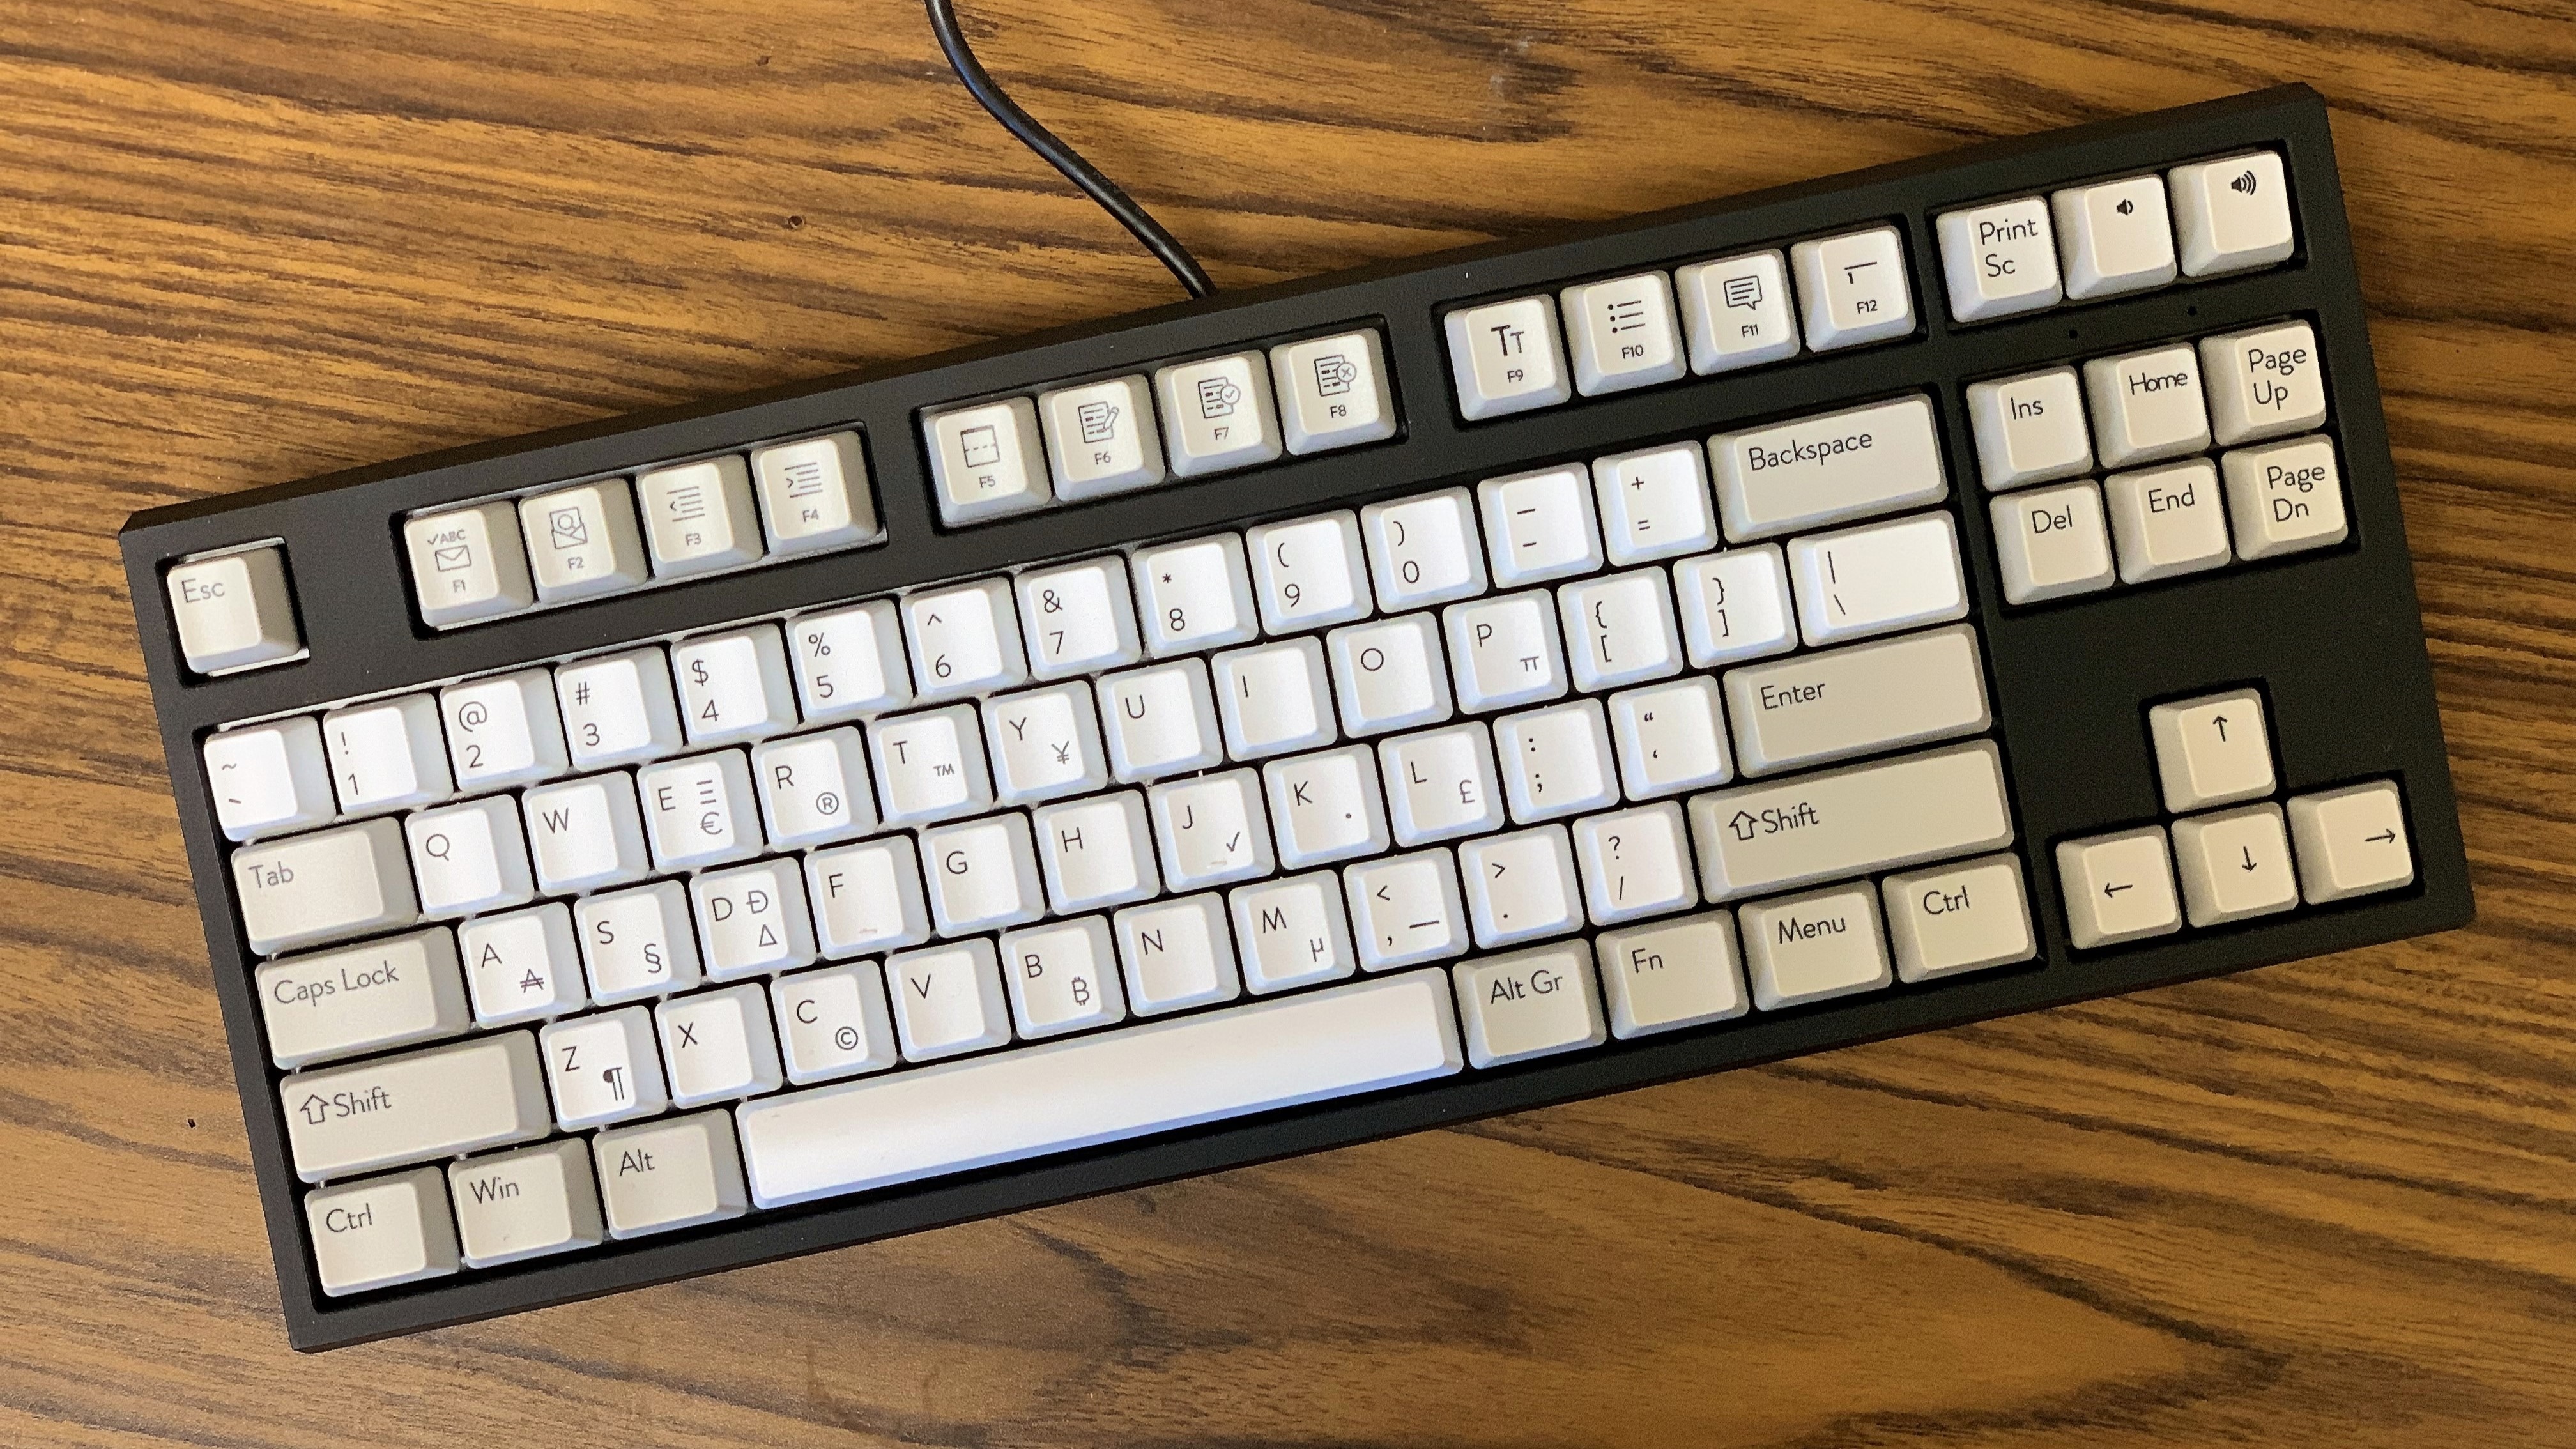 A Mechanical Keyboard Designed for Lawyers